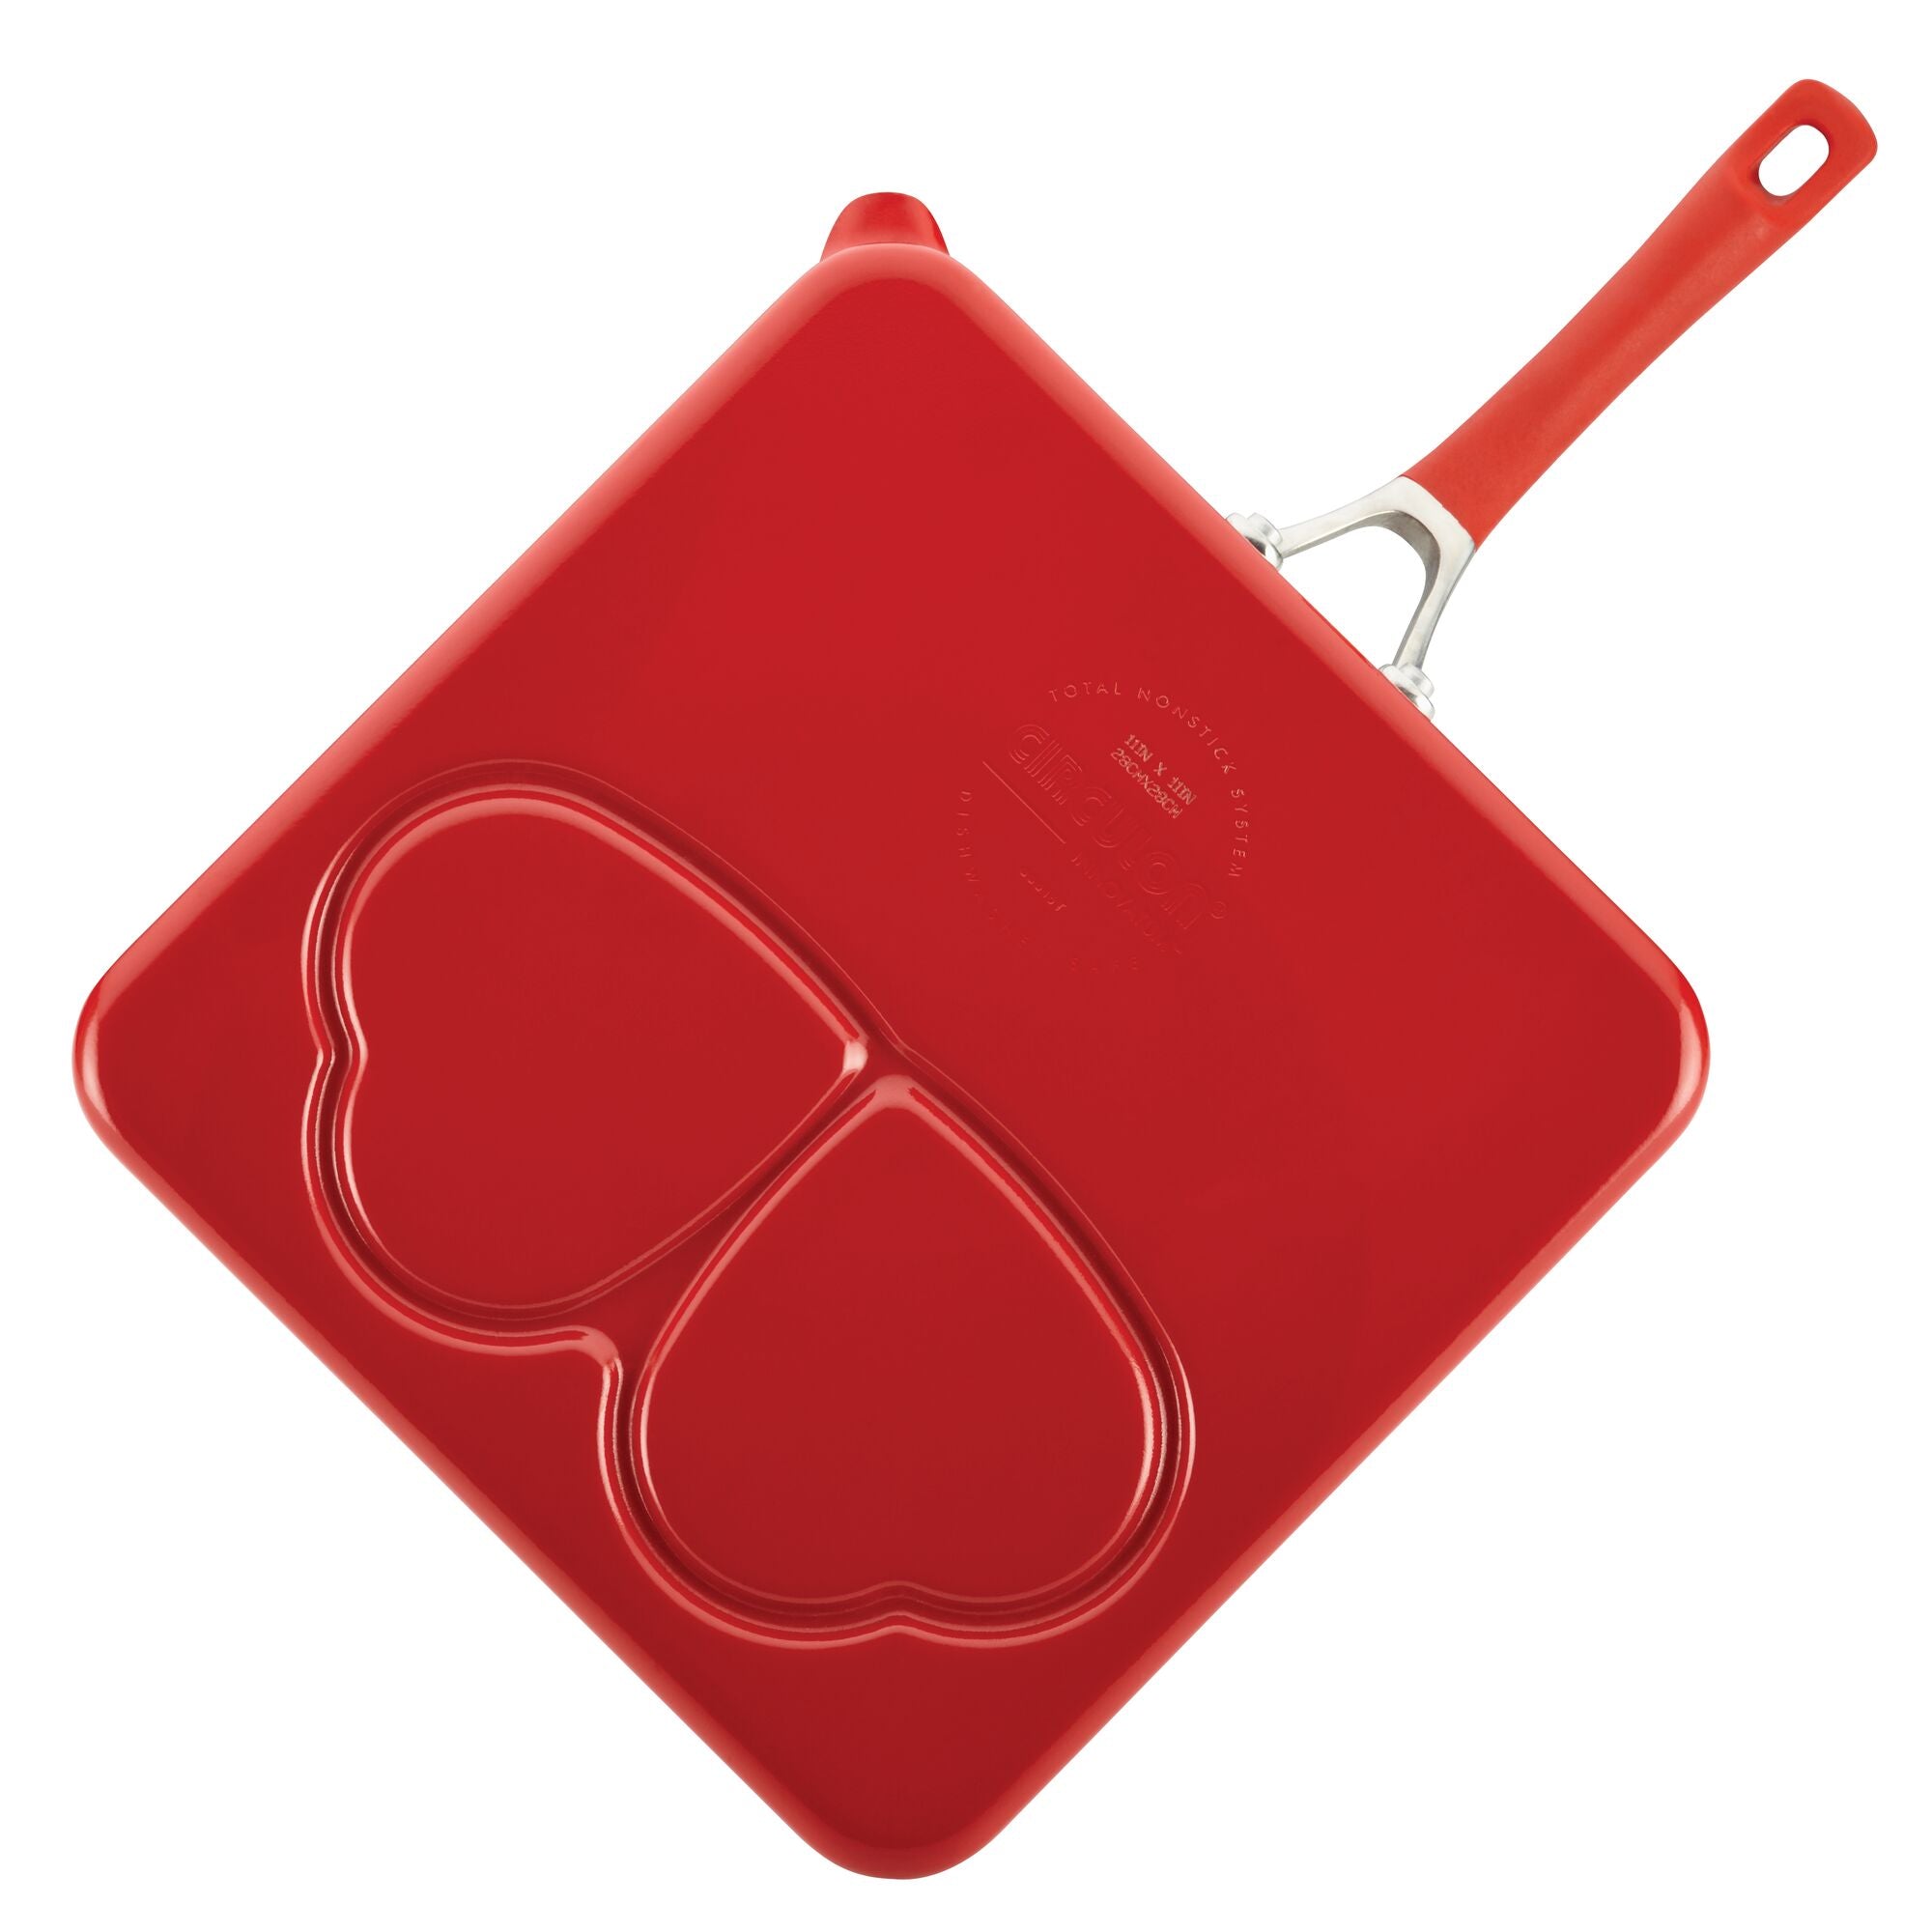 11-Inch Square Sweetheart Griddle